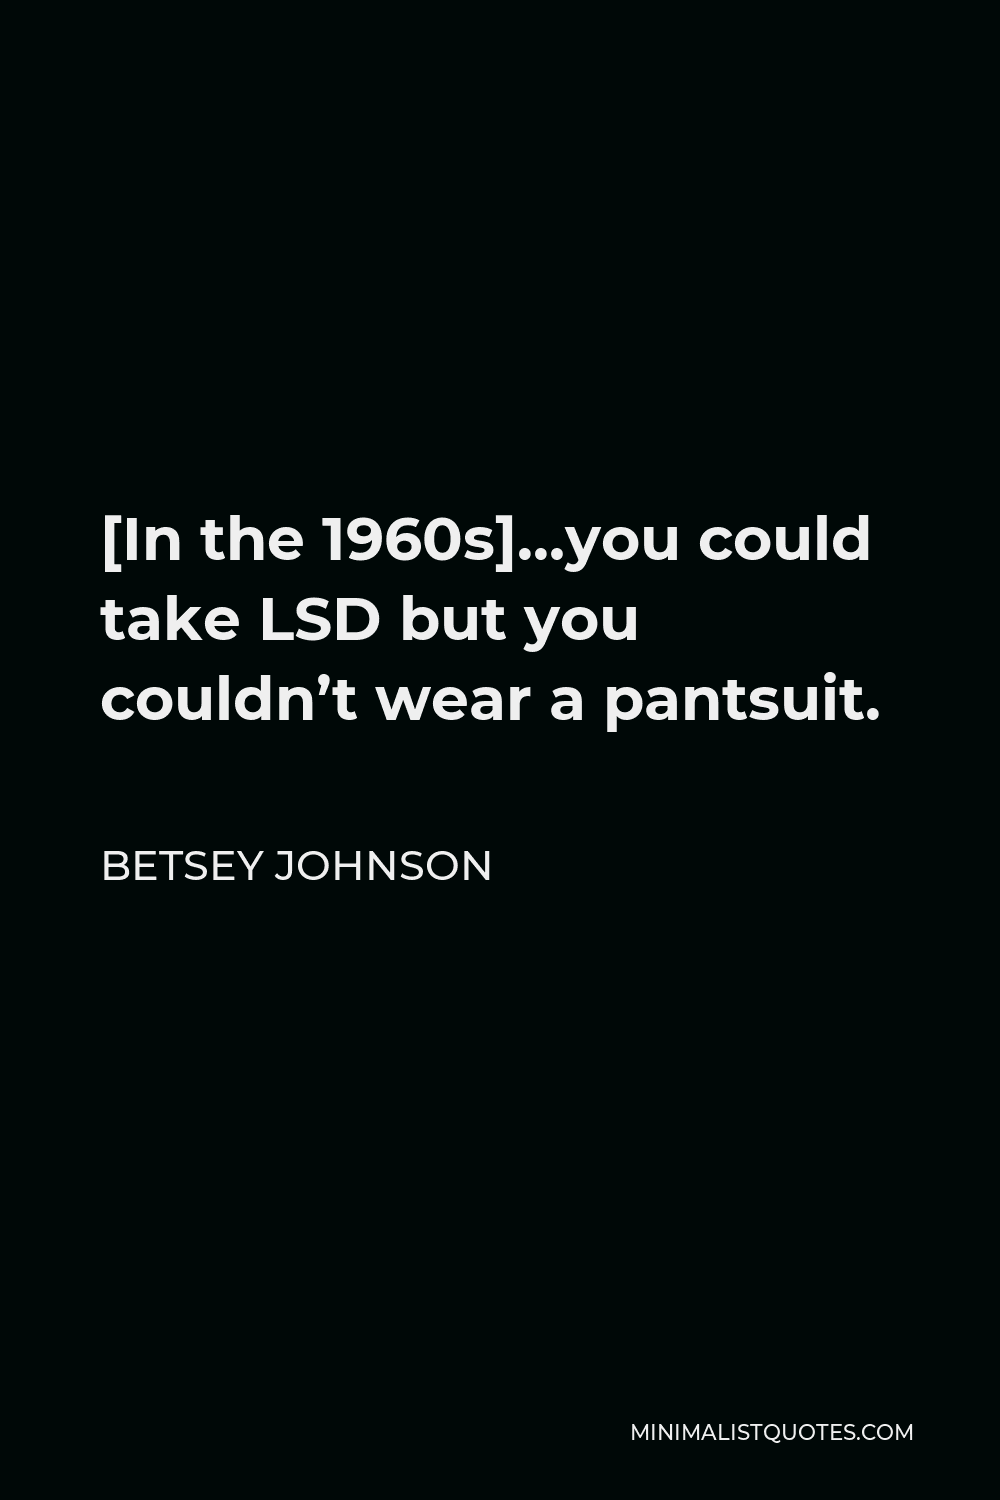 Betsey Johnson Quote - [In the 1960s]…you could take LSD but you couldn’t wear a pantsuit.